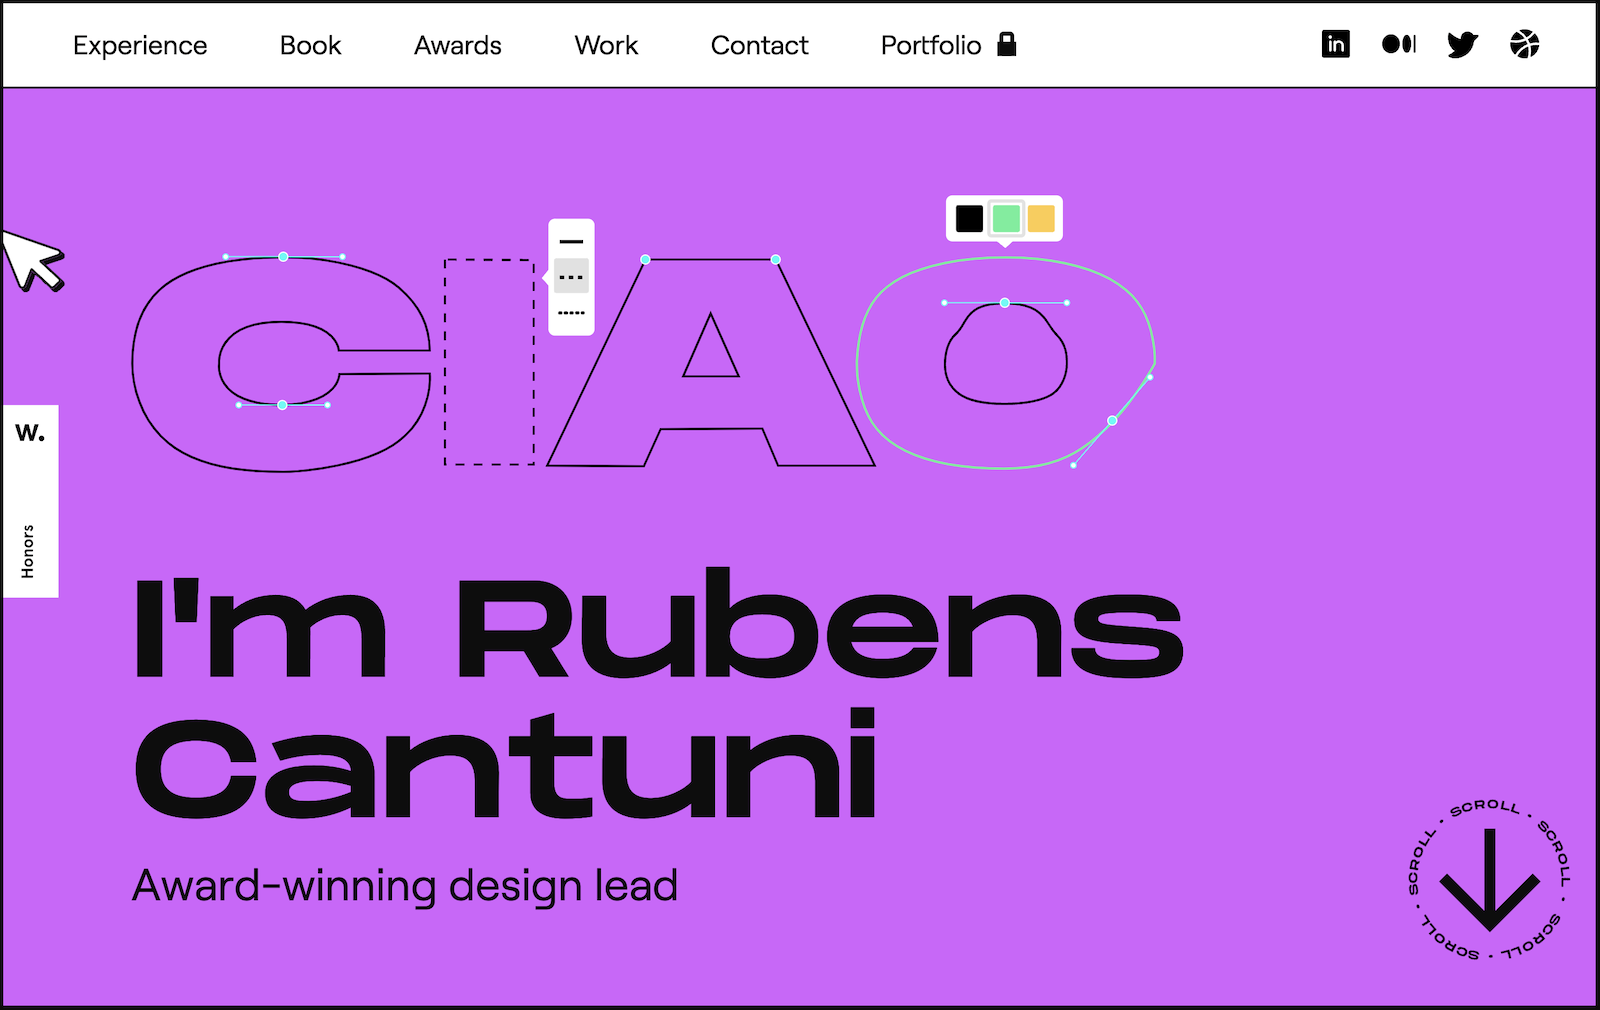 Rubens Cantuni's personal website showcases his experience and portfolio of designed projects.